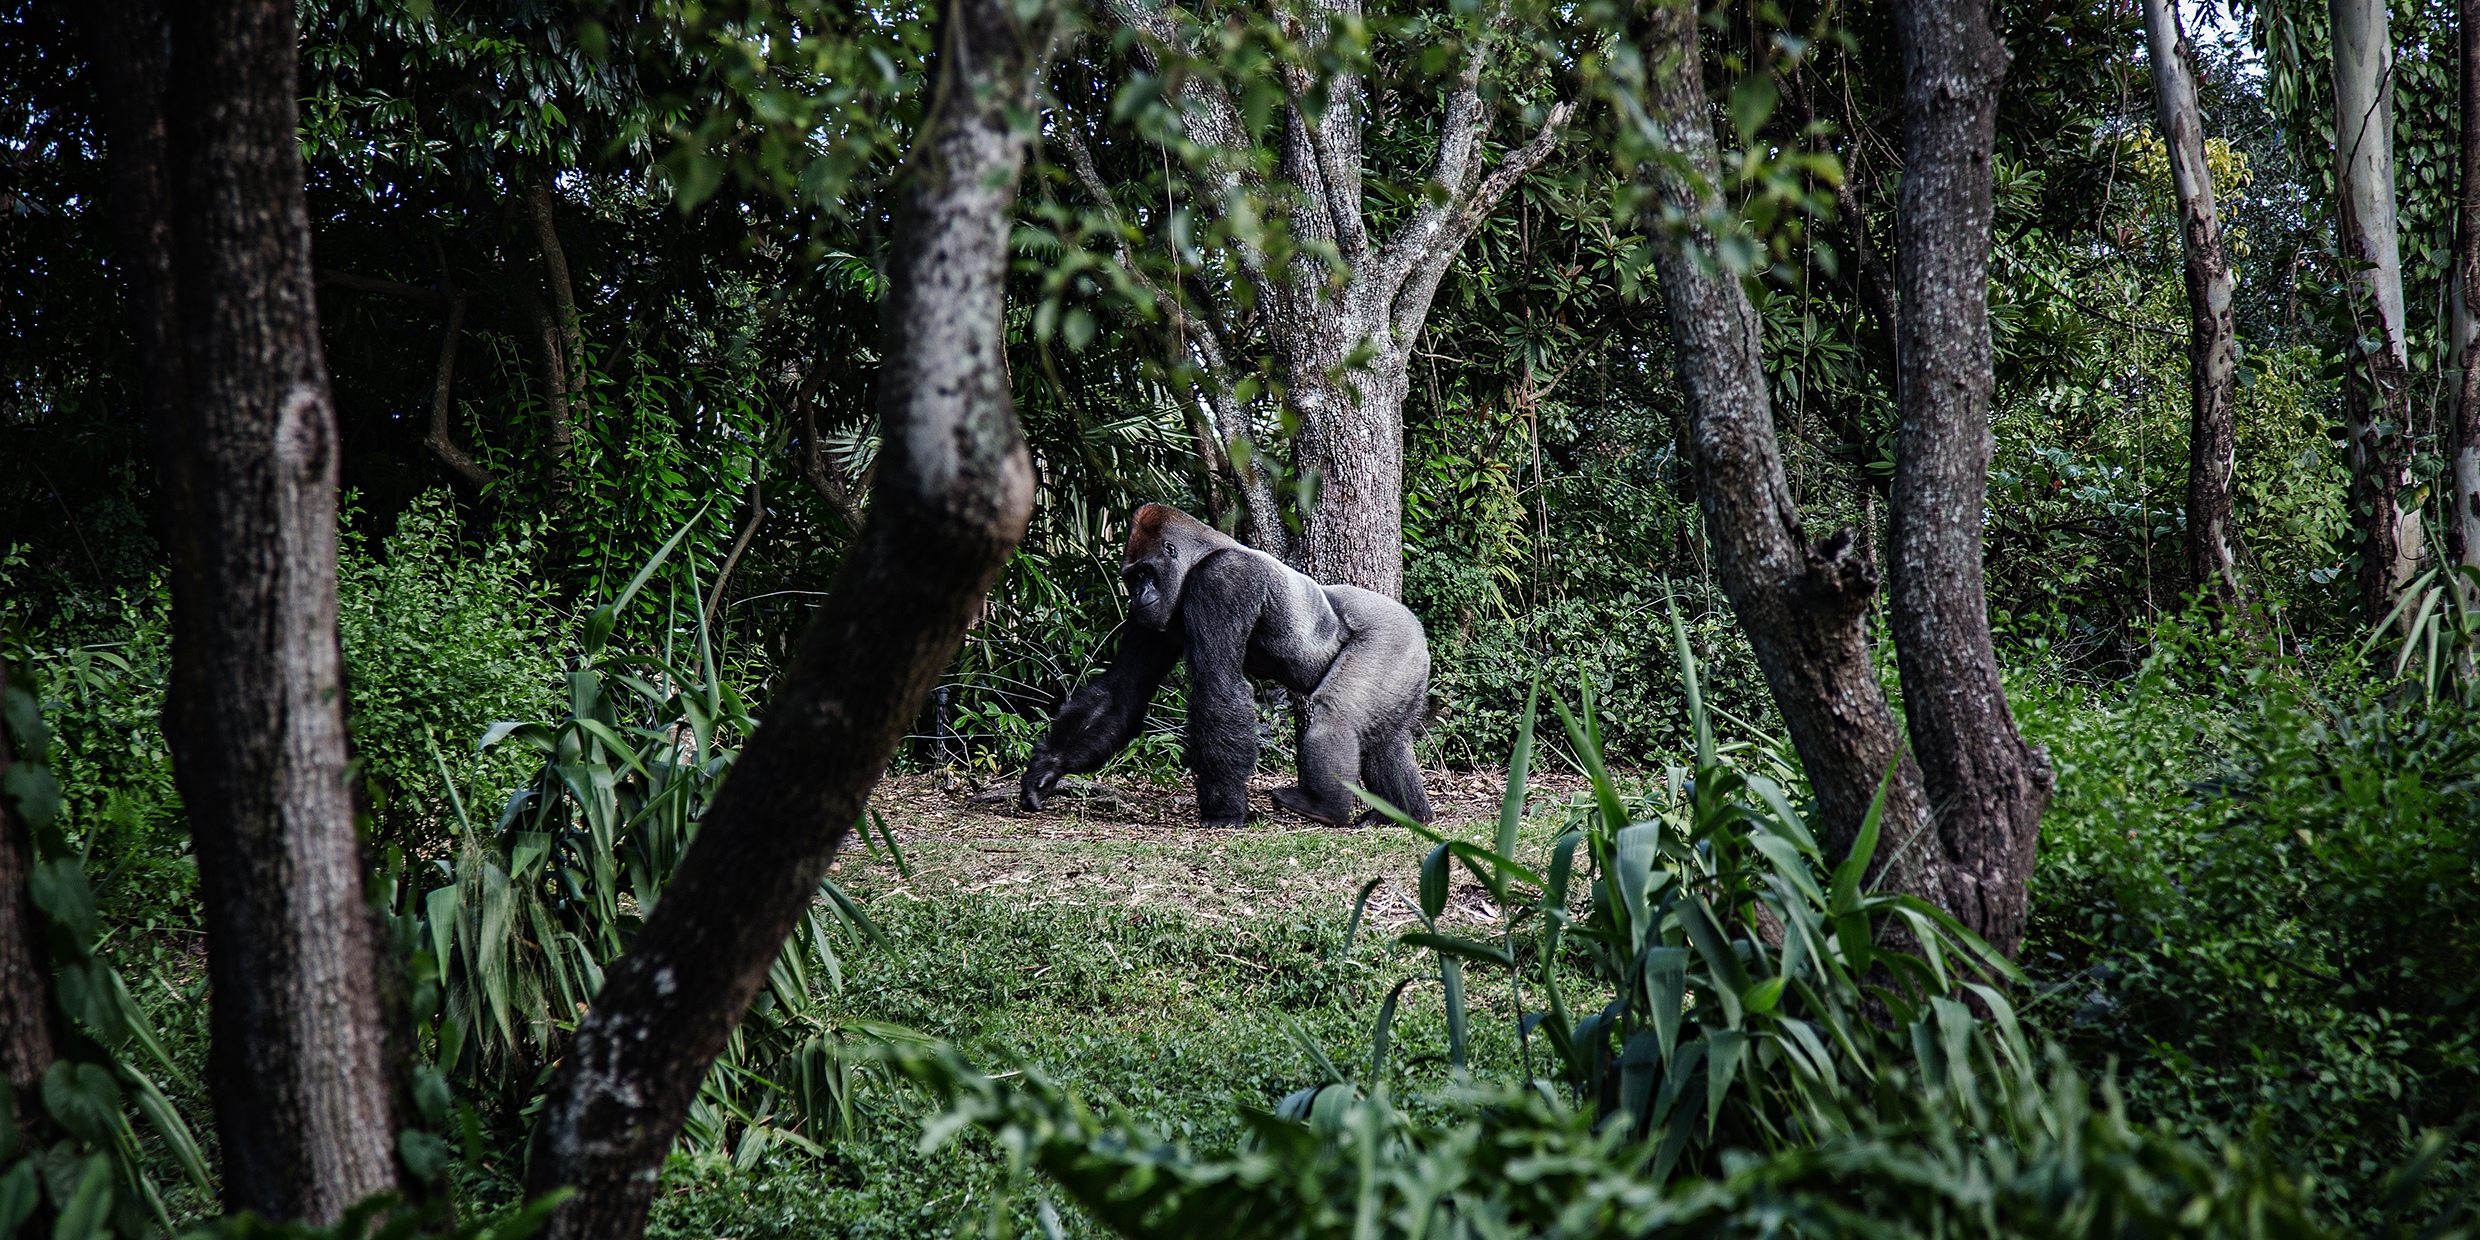 Image of a gorilla knuckle-walking through a forest